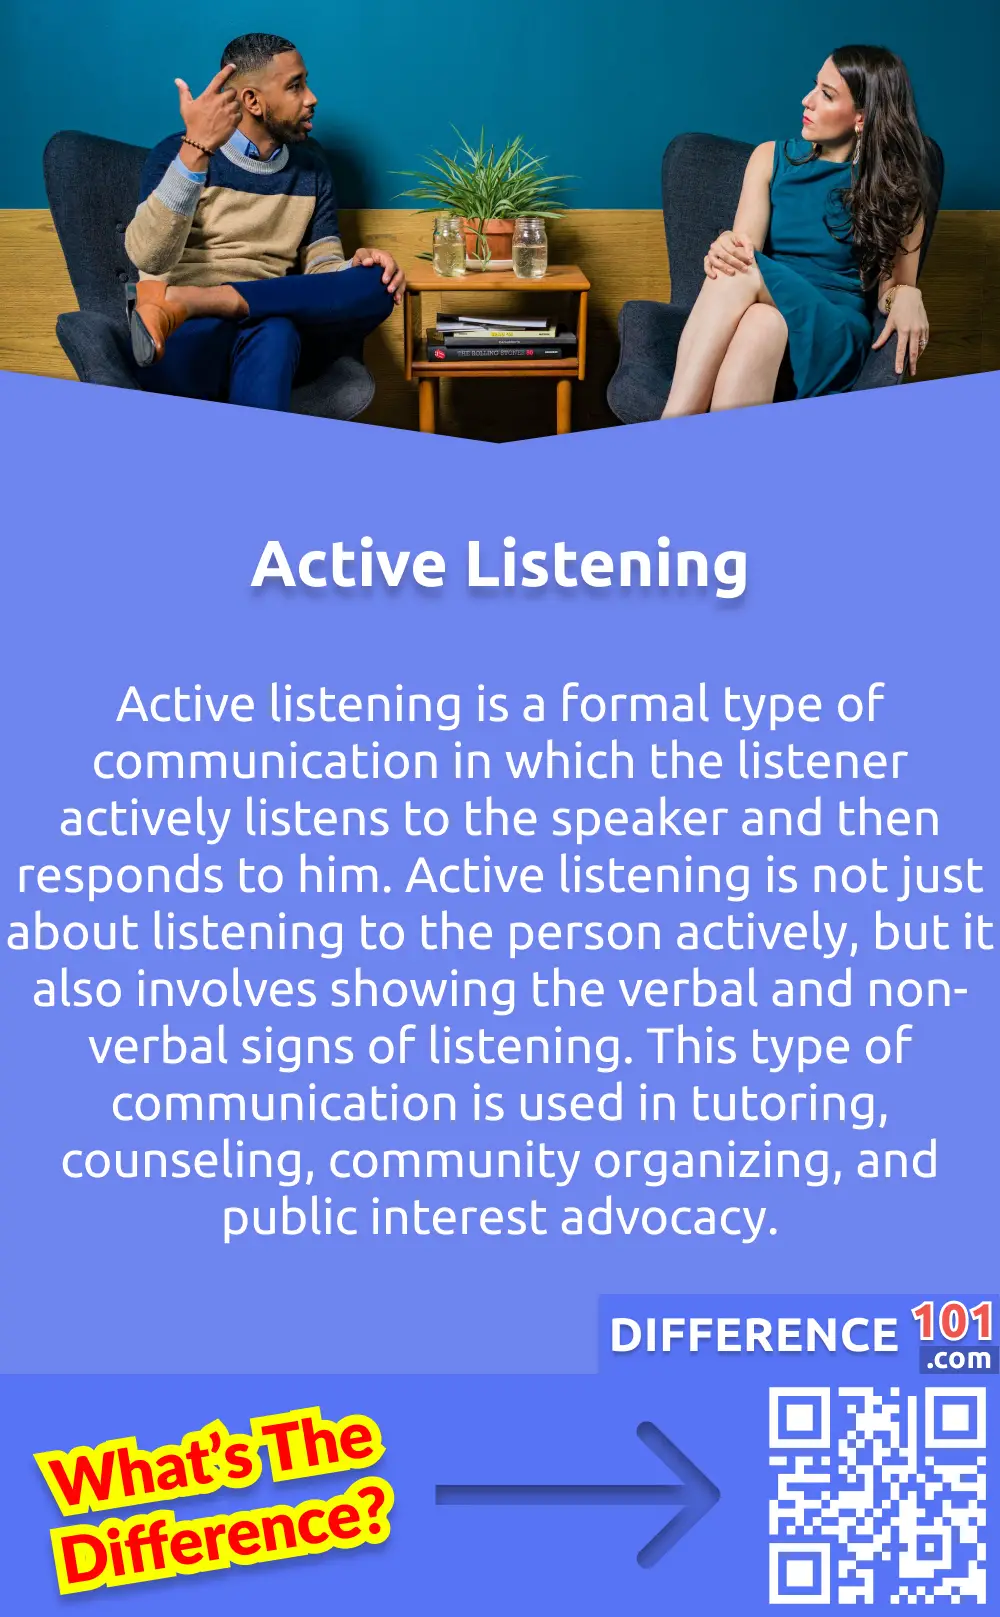 What Is Active Listening? Active listening is a formal type of communication in which the listener actively listens to the speaker and then responds to him. Active listening is not just about listening to the person actively, but it also involves showing the verbal and non-verbal signs of listening. This type of communication is used in tutoring, counseling, community organizing, and public interest advocacy.